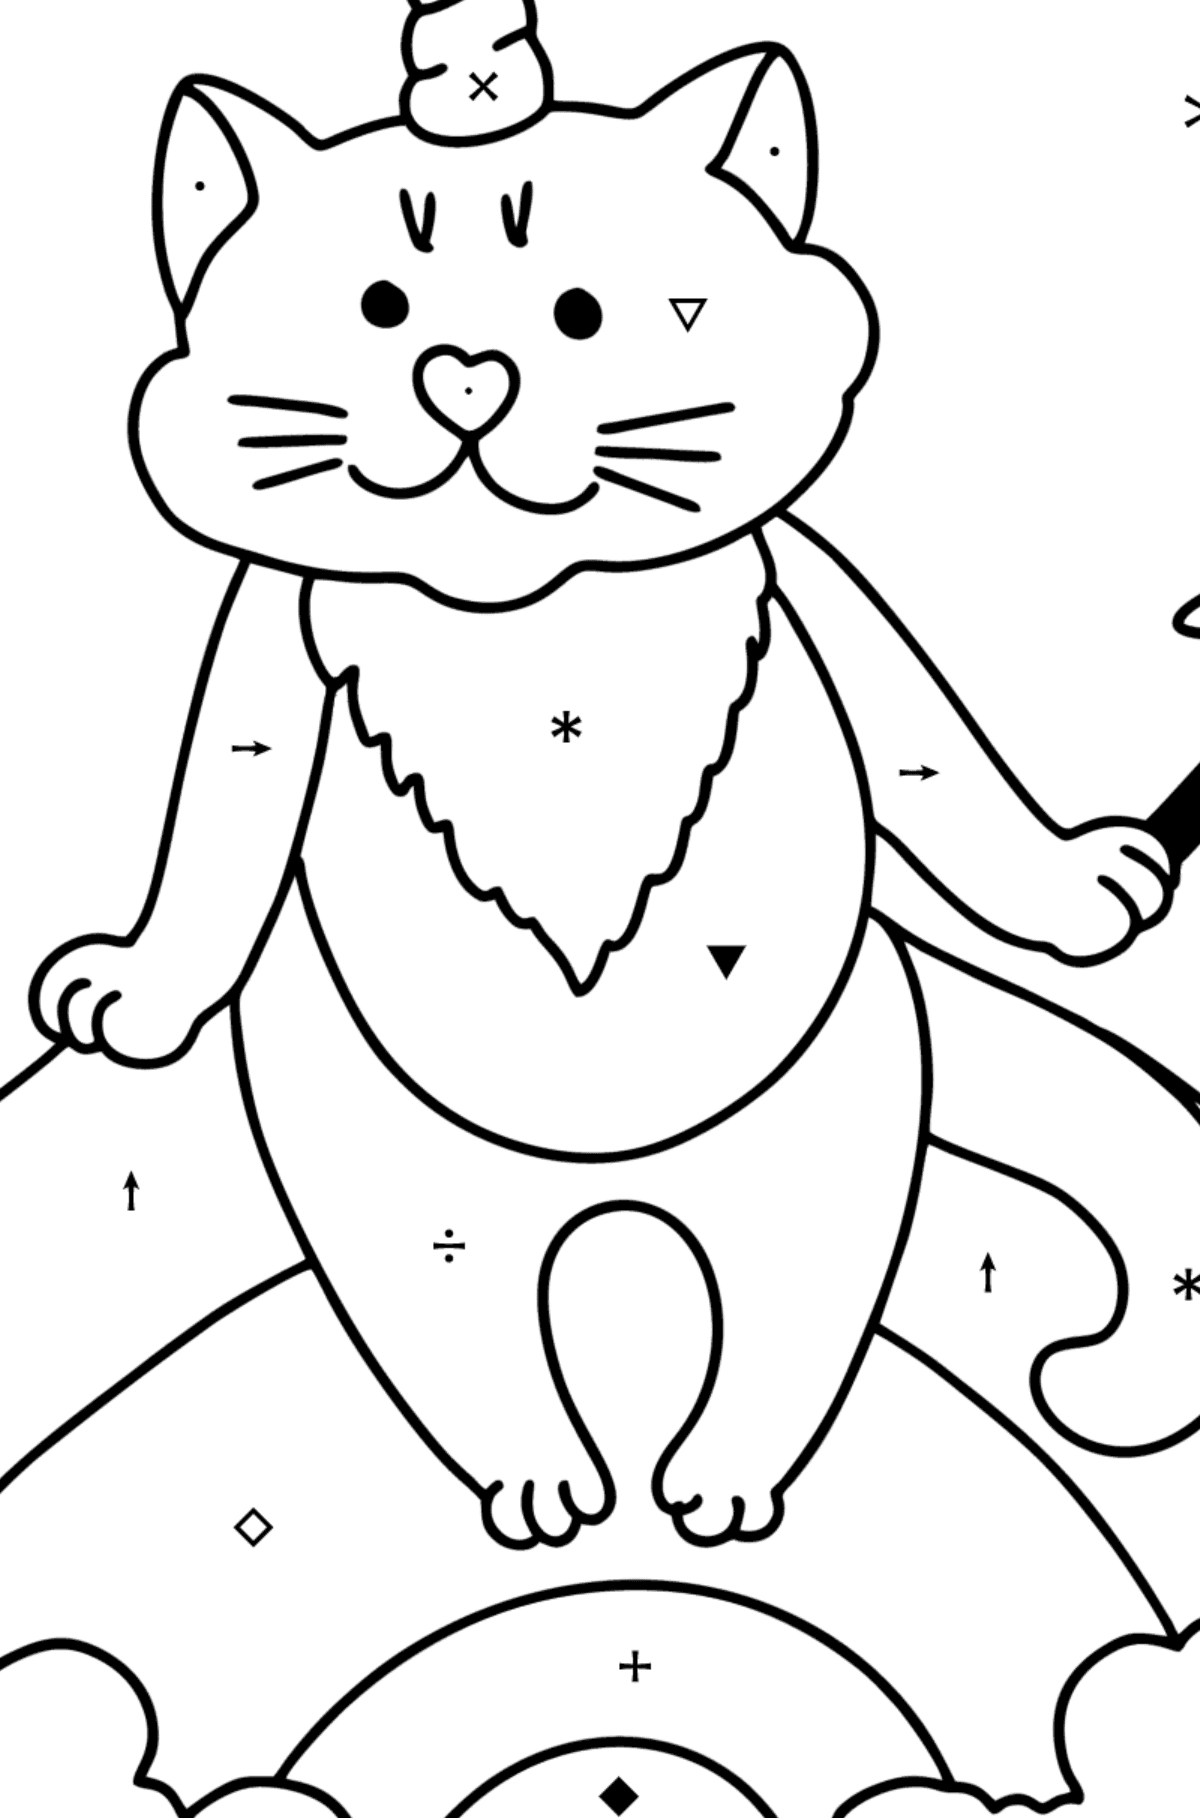 Kitten Unicorn coloring page - Coloring by Symbols for Kids